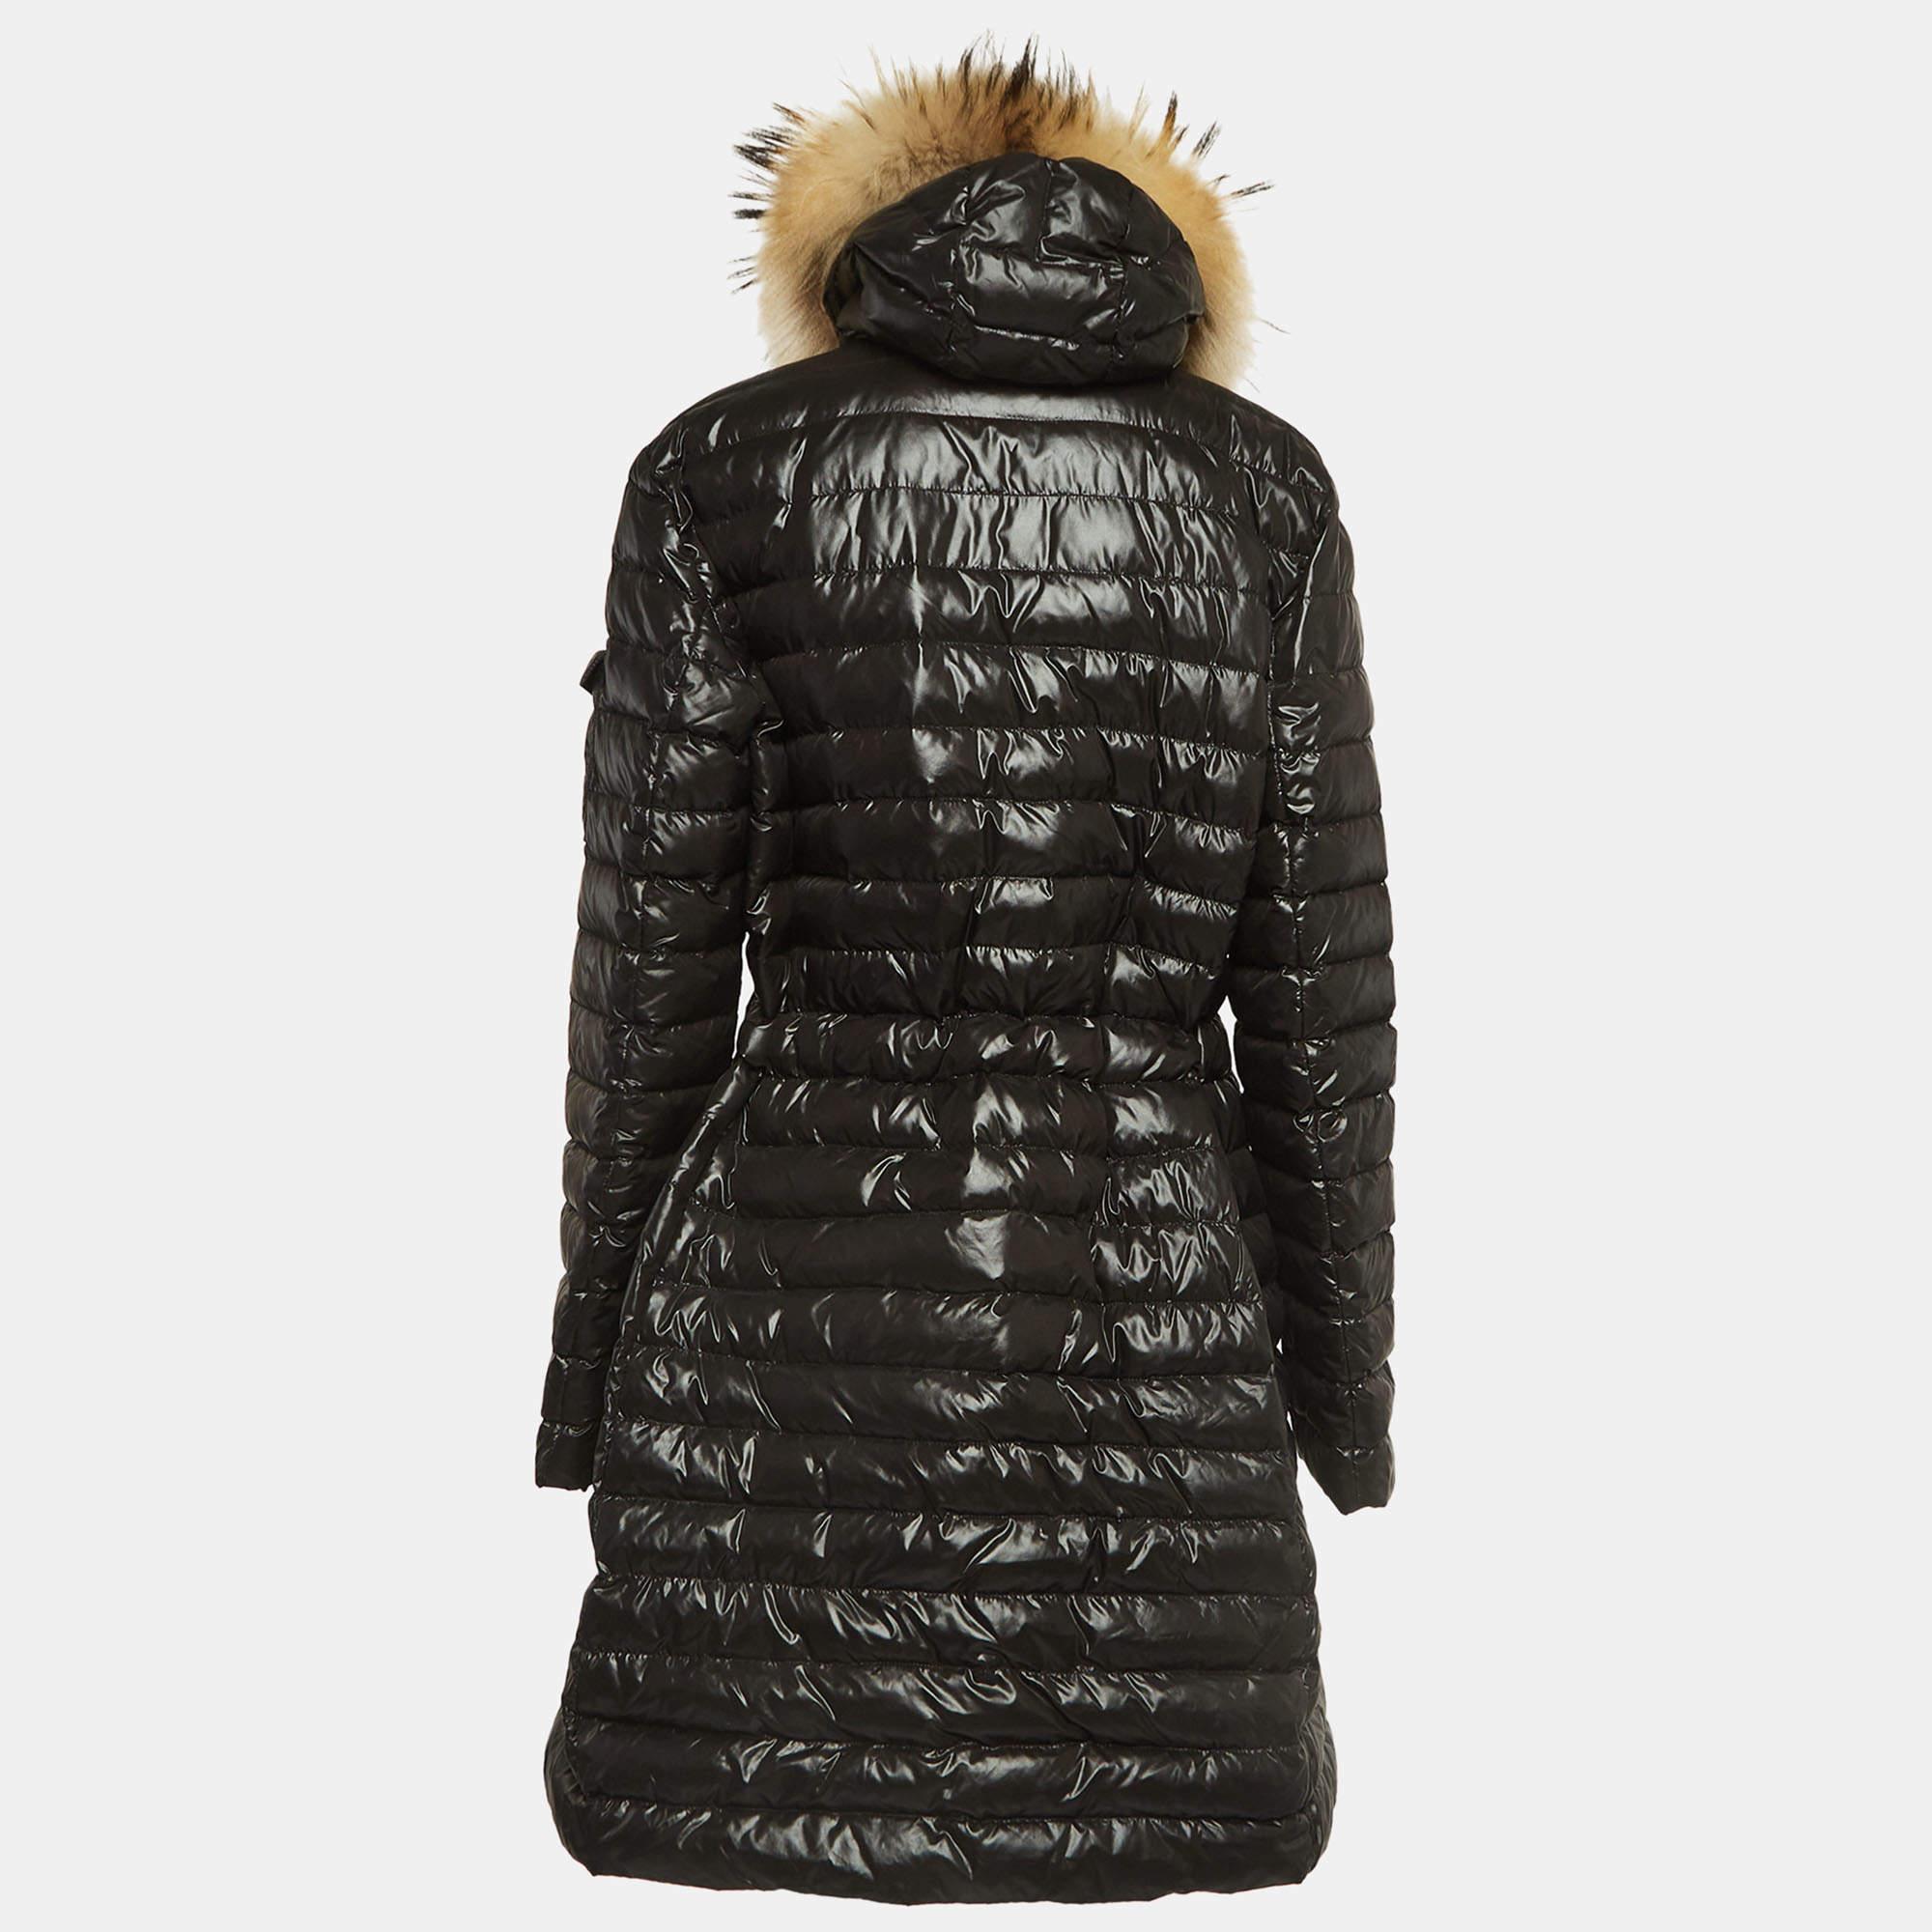 Moncler Black Nylon Quilted Puffer Jacket 2XL In Good Condition For Sale In Dubai, Al Qouz 2